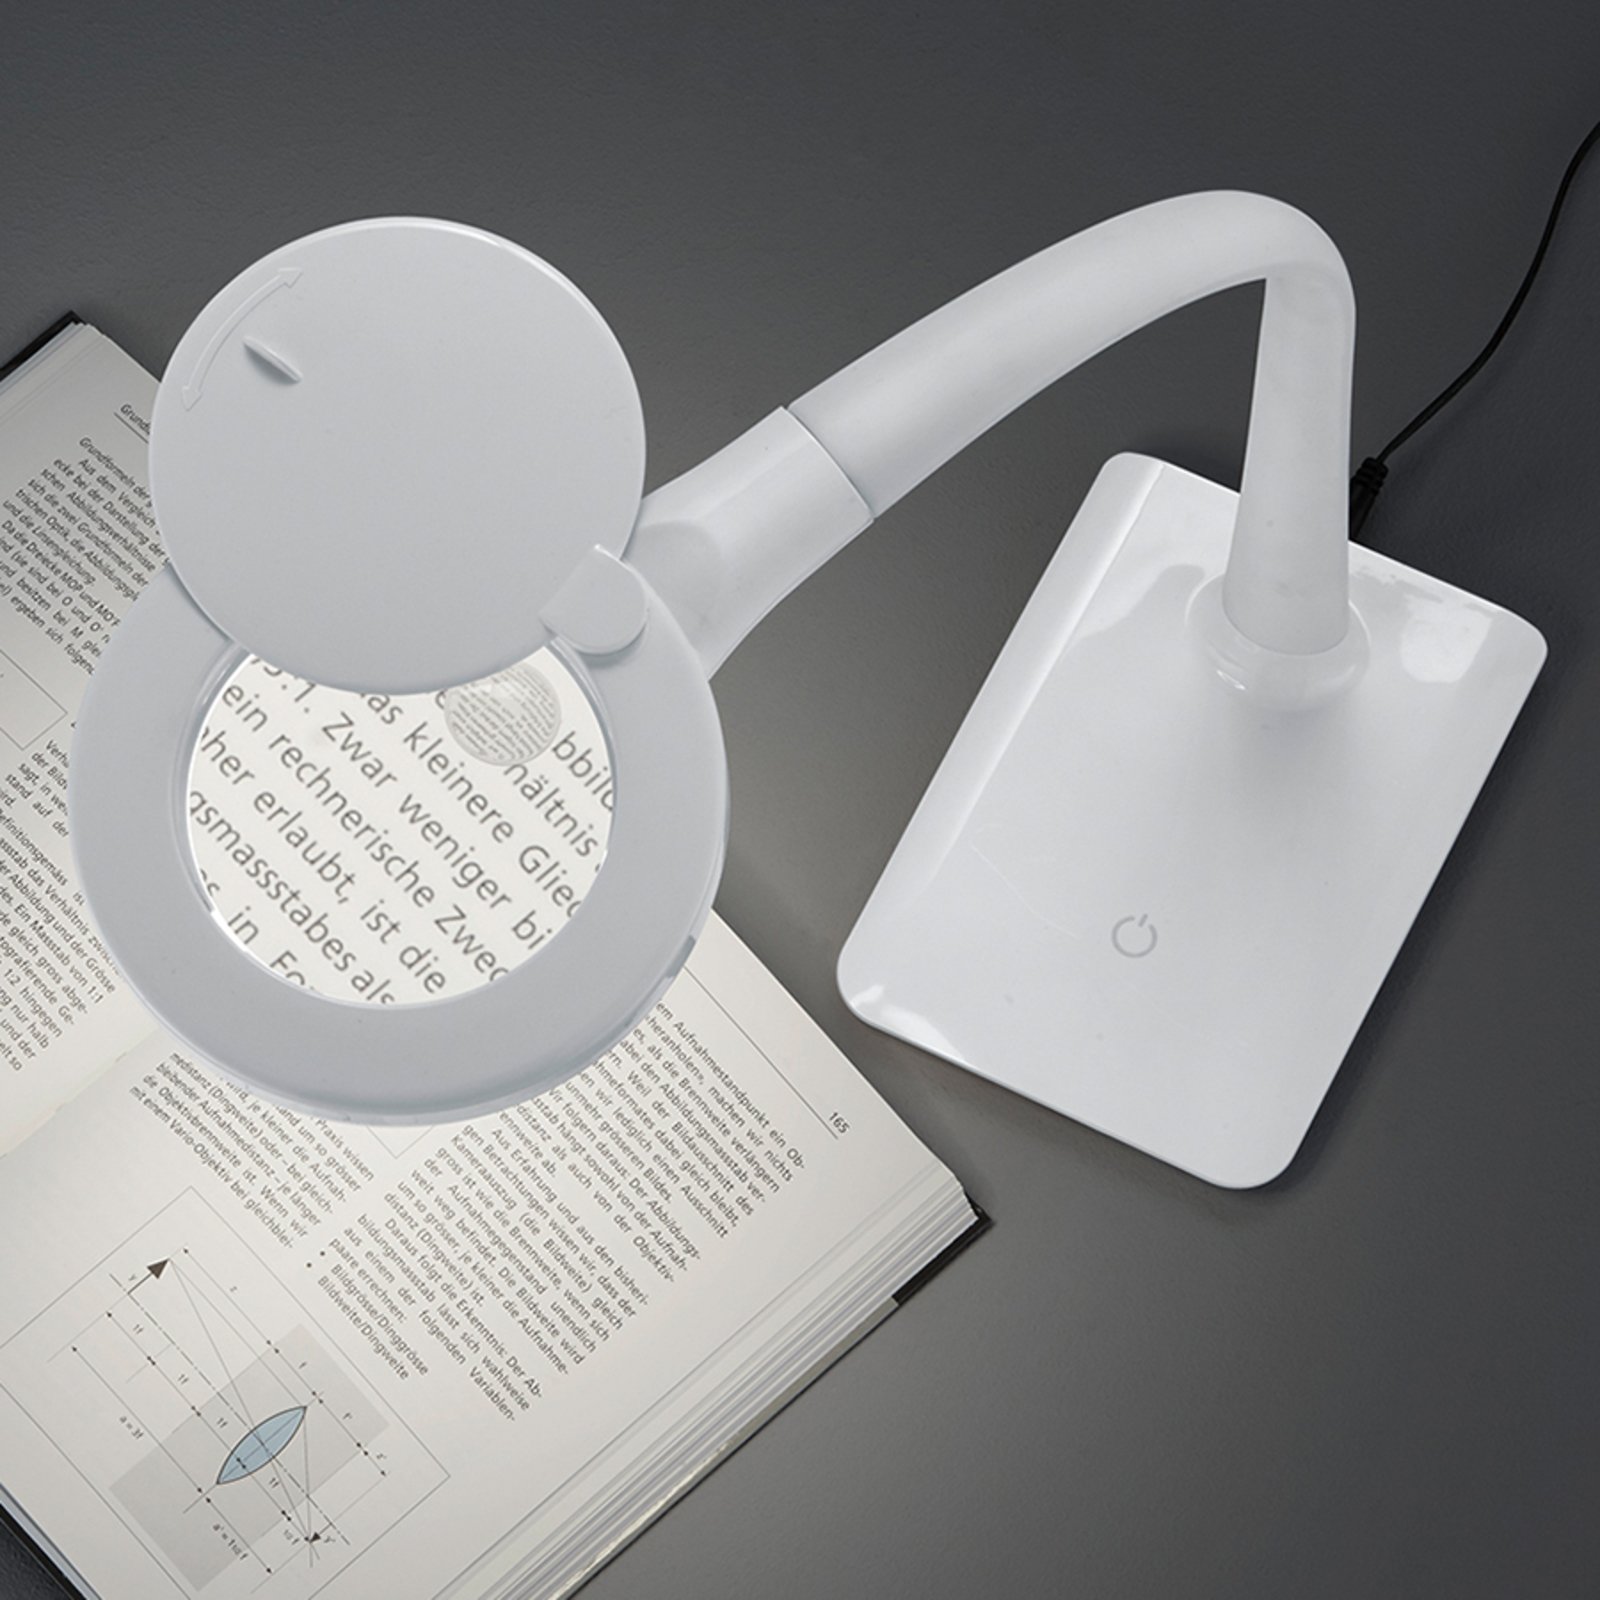 With a base - LED magnifying light Lupo, white